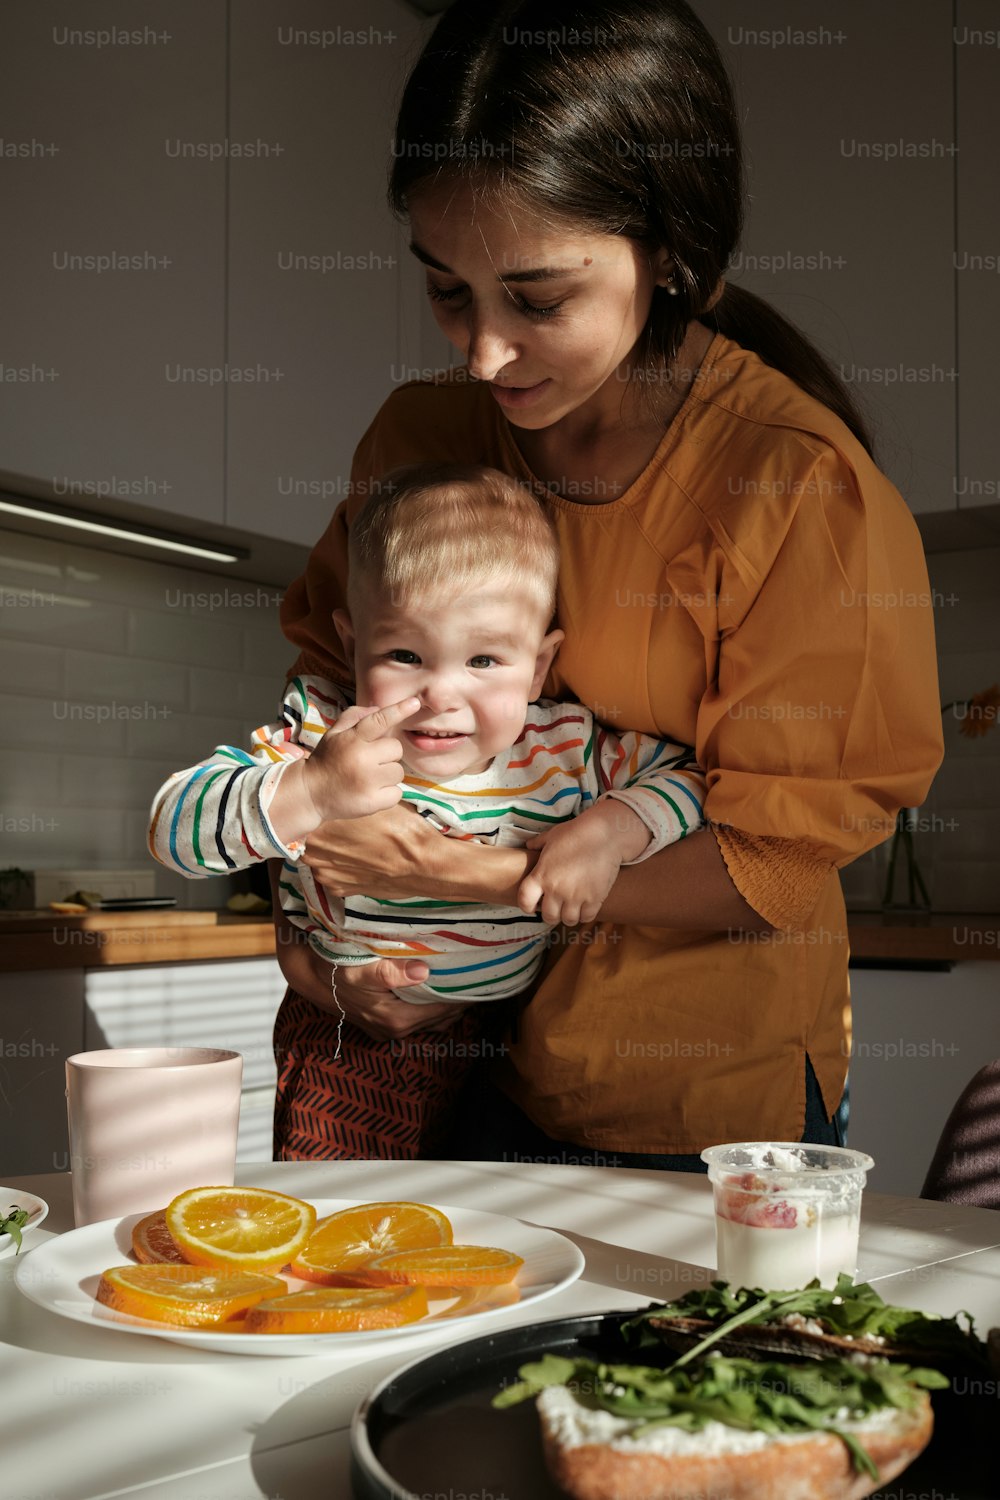 a woman holding a baby in front of a plate of food